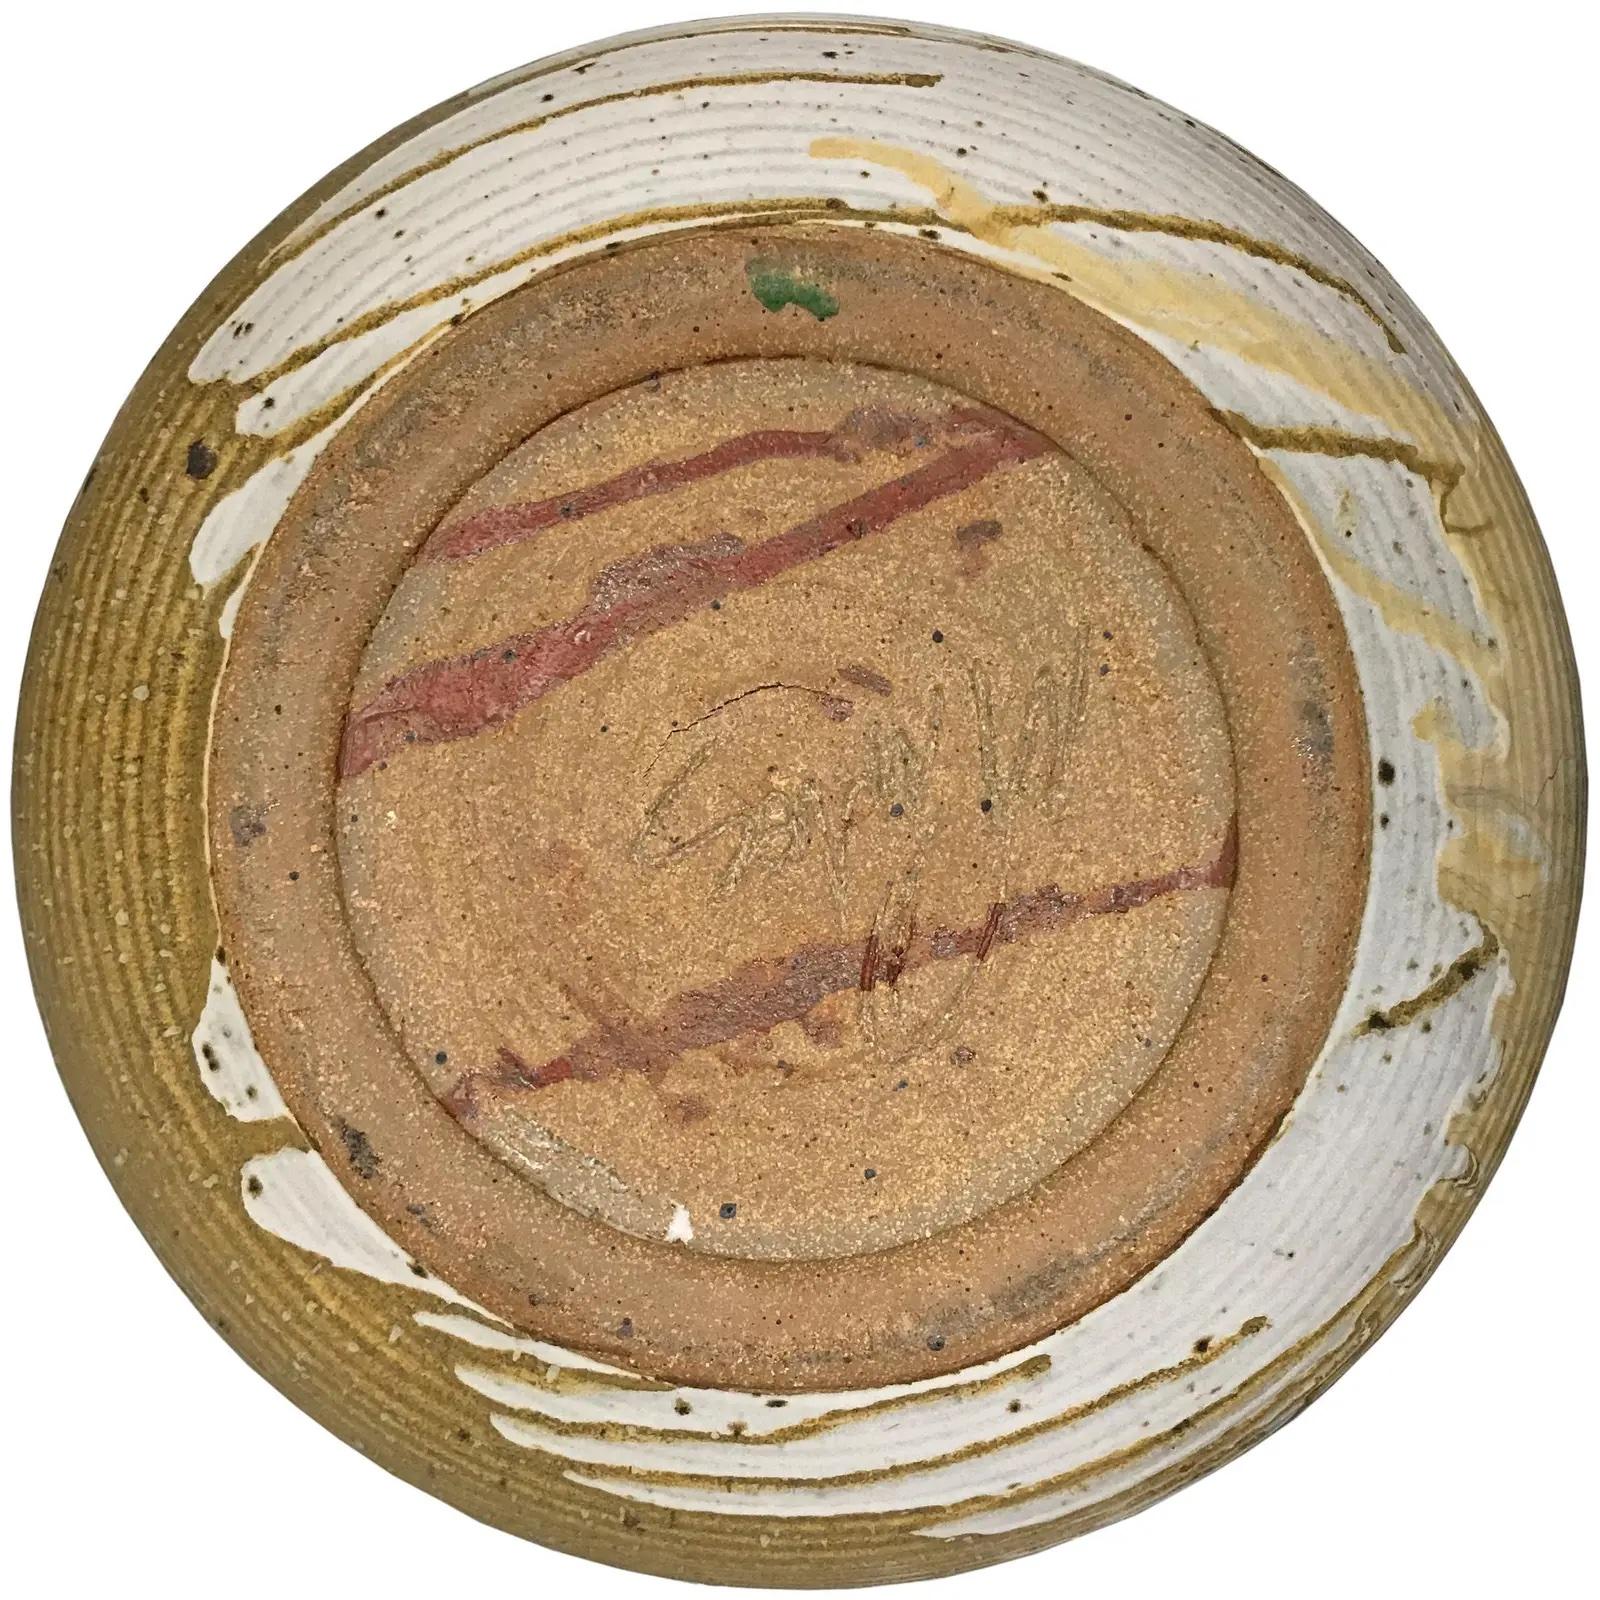 Monumental Mid-20th Century American Studio Pottery Bowl In Good Condition For Sale In Chicago, IL